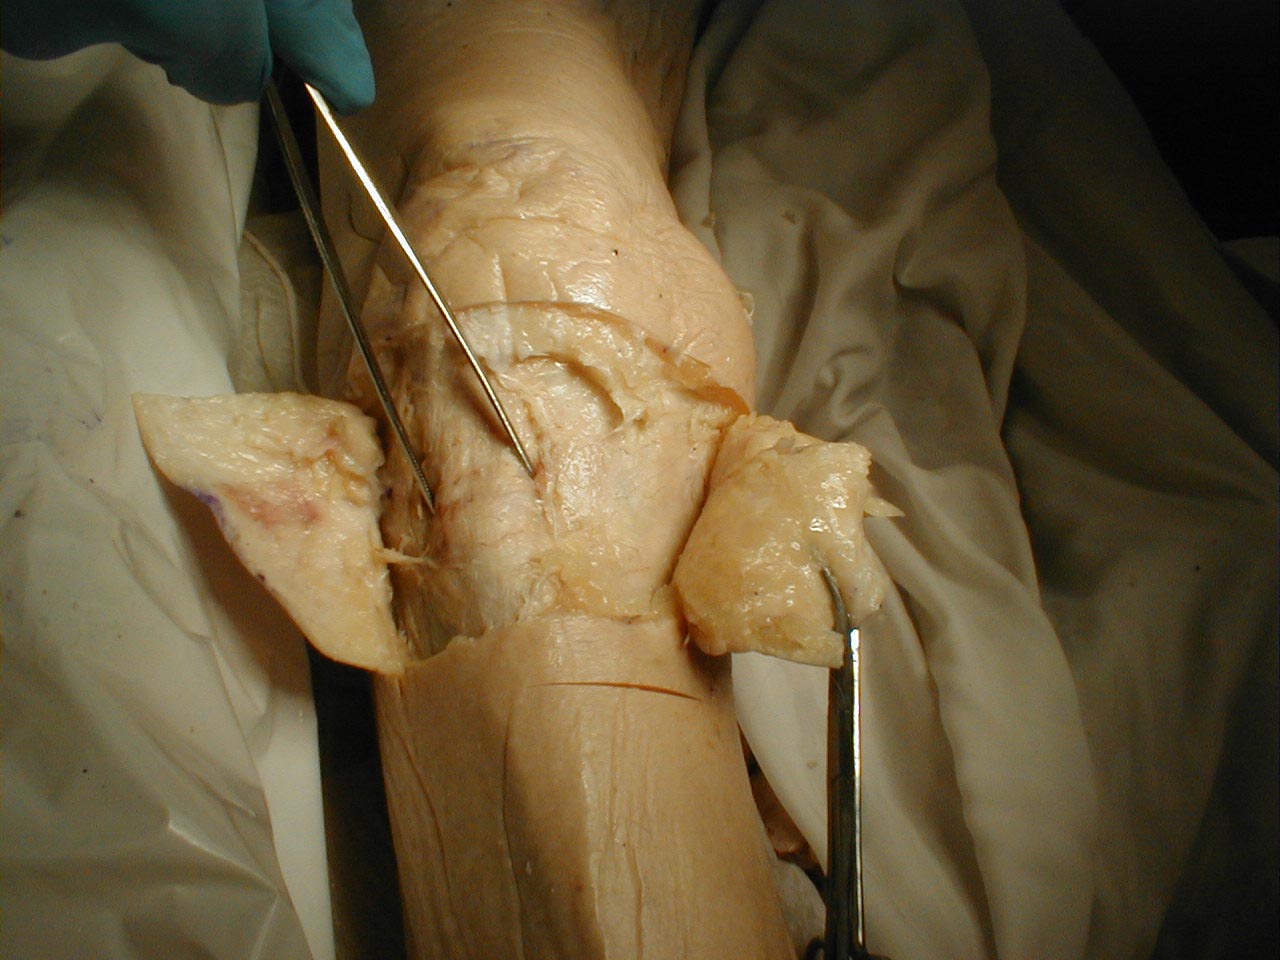 Patellar tendon: The tendon is grasped by forceps (gross dissection)